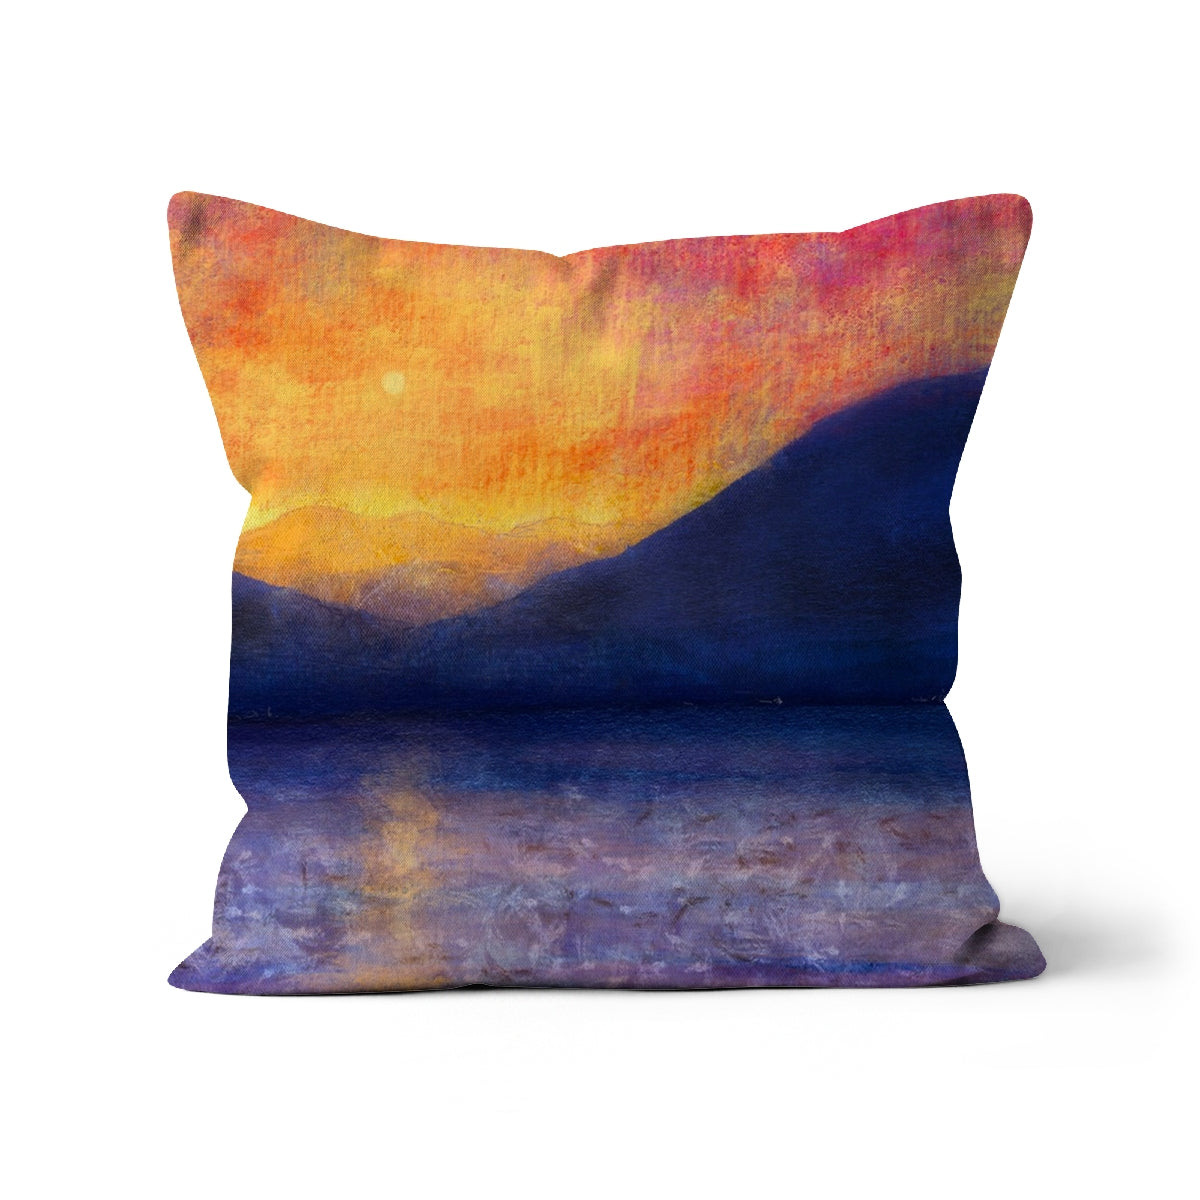 Sunset Approaching Mull Art Gifts Cushion-Cushions-Hebridean Islands Art Gallery-Canvas-24"x24"-Paintings, Prints, Homeware, Art Gifts From Scotland By Scottish Artist Kevin Hunter